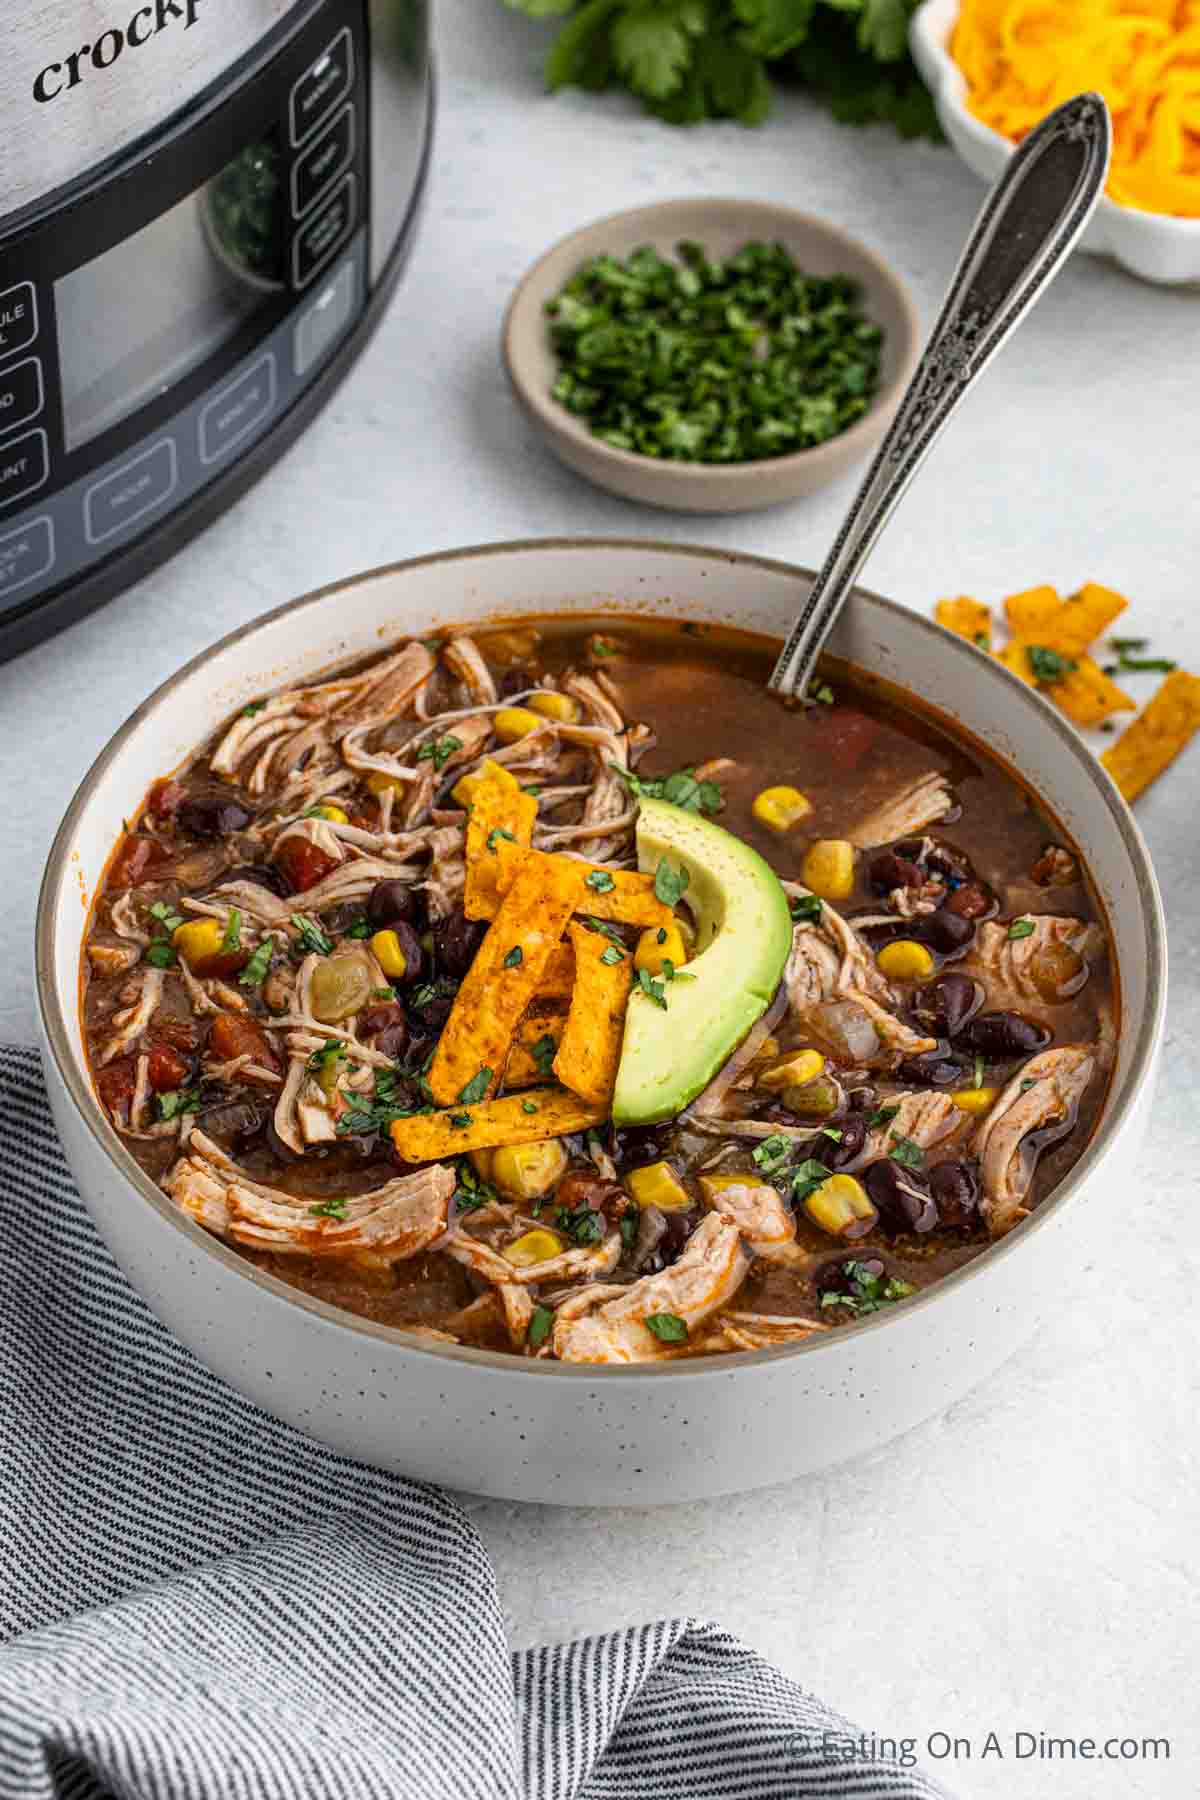 Easy Crockpot Soup Recipes: Cozy Meals for Cold Days